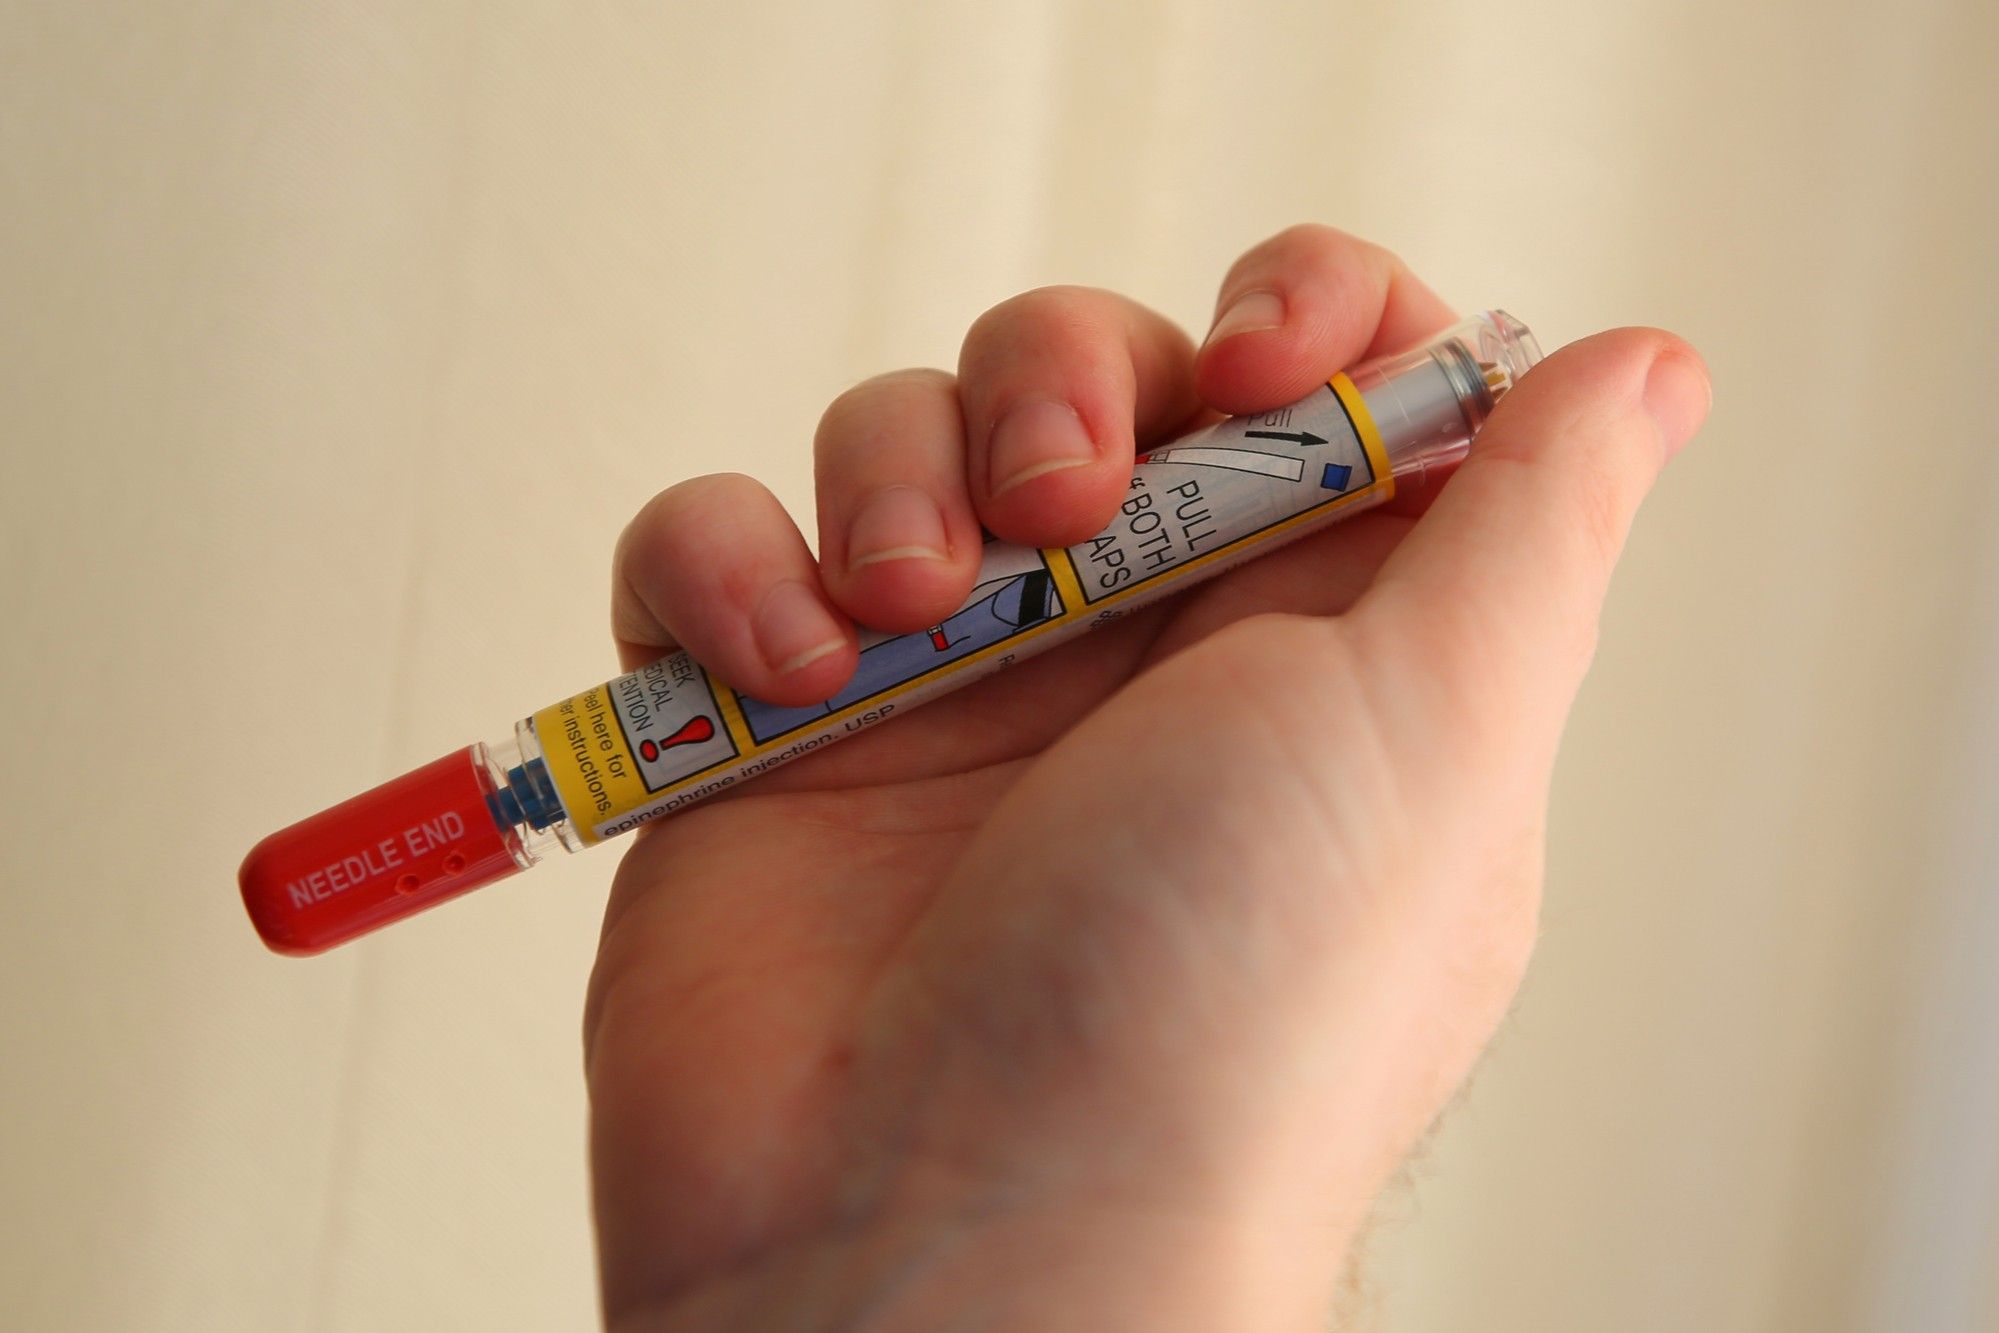 A Mylan EpiPen antitrust class action lawsuit has been filed against the drugmaker.